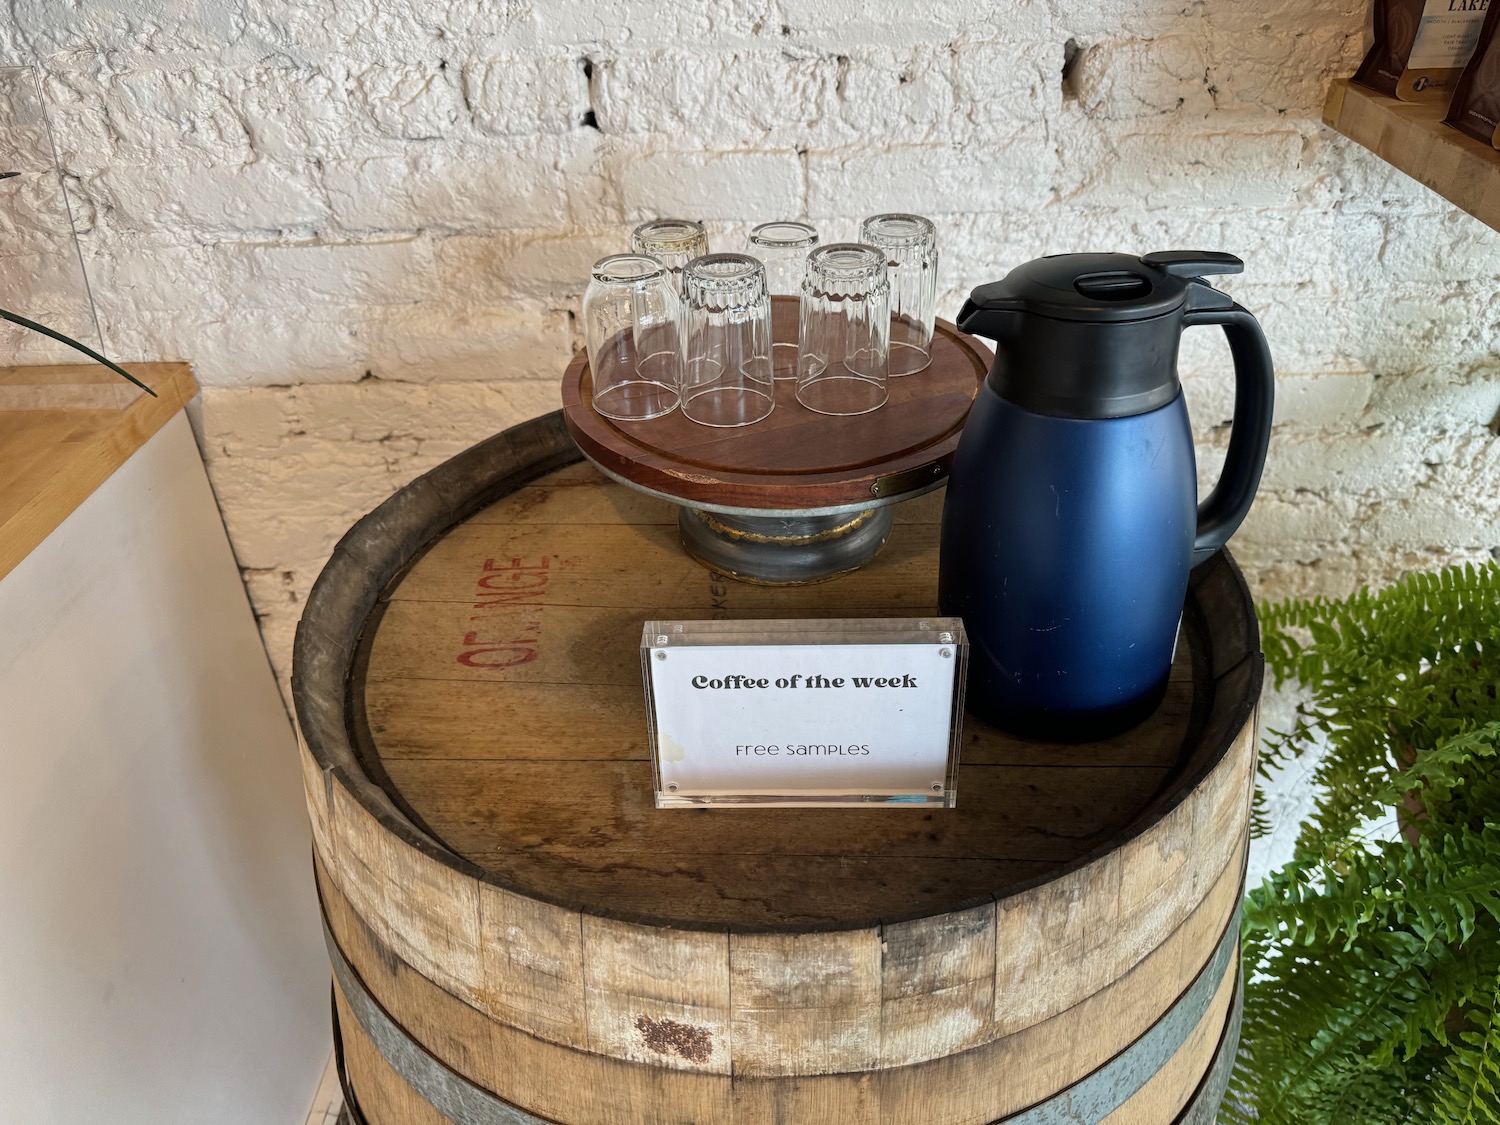 a barrel with glasses on it